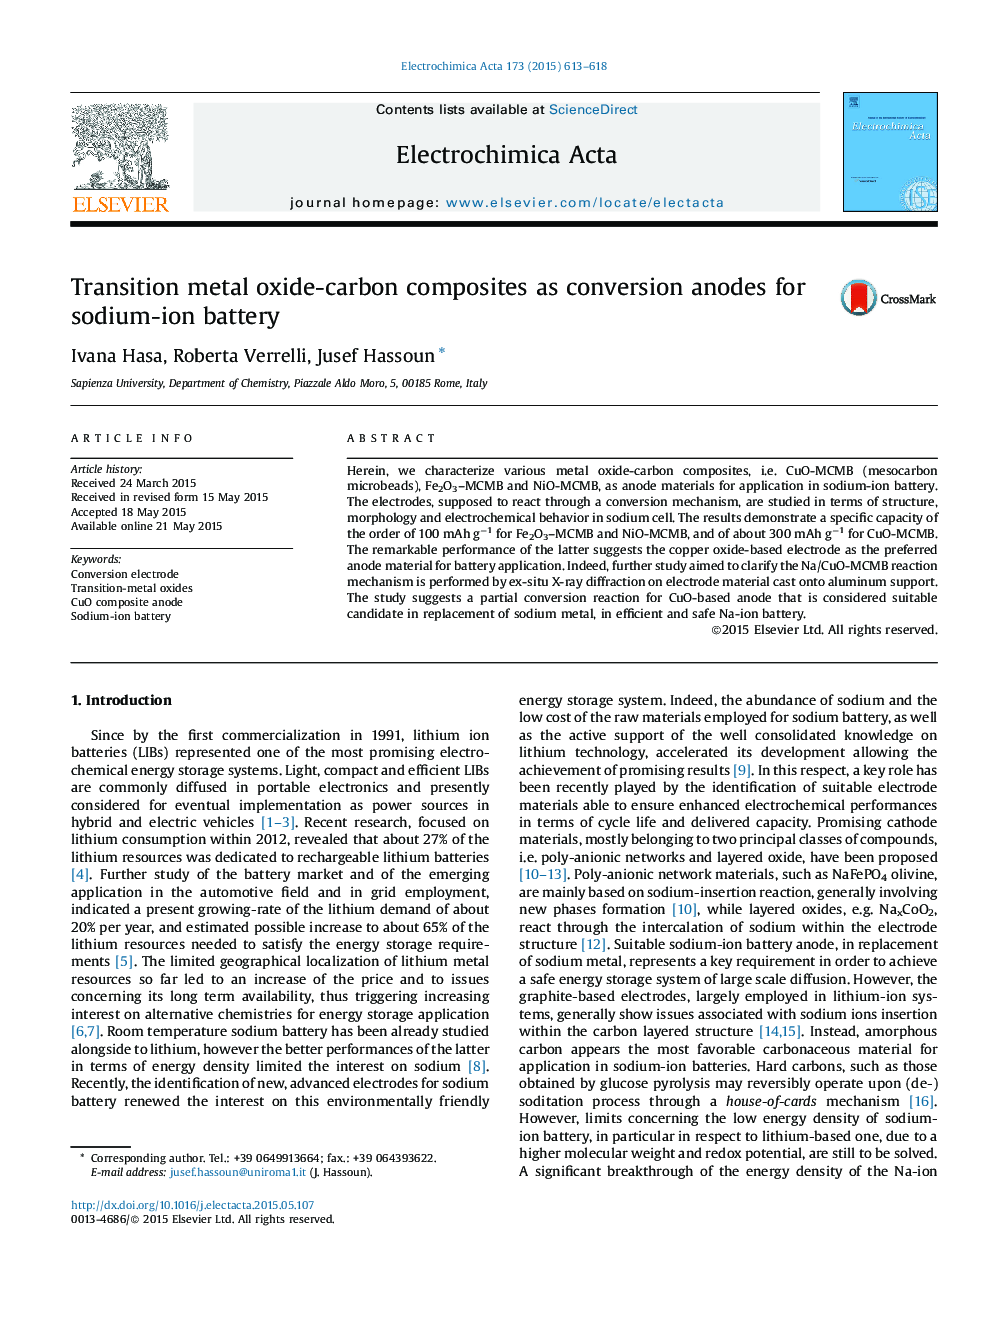 Transition metal oxide-carbon composites as conversion anodes for sodium-ion battery